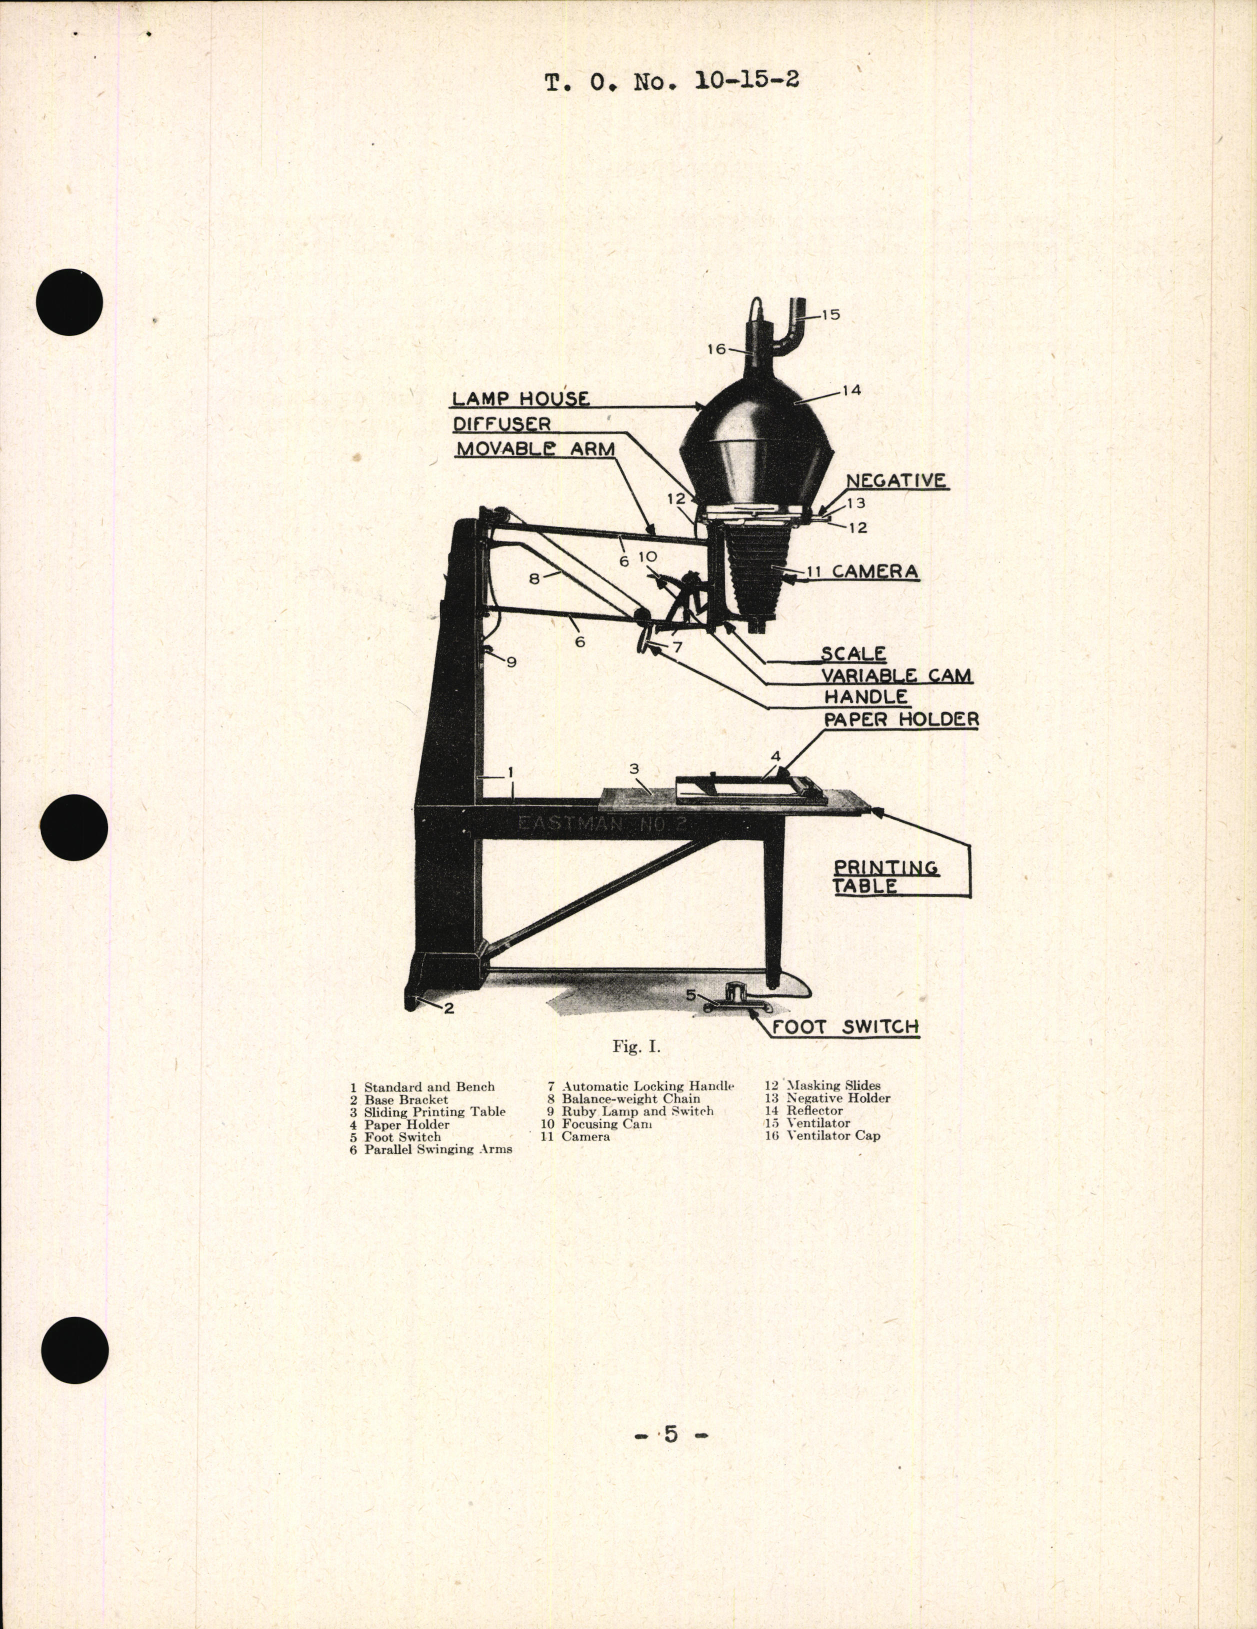 Sample page 7 from AirCorps Library document: Handbook of Instructions for Type B-1 Projection Printer